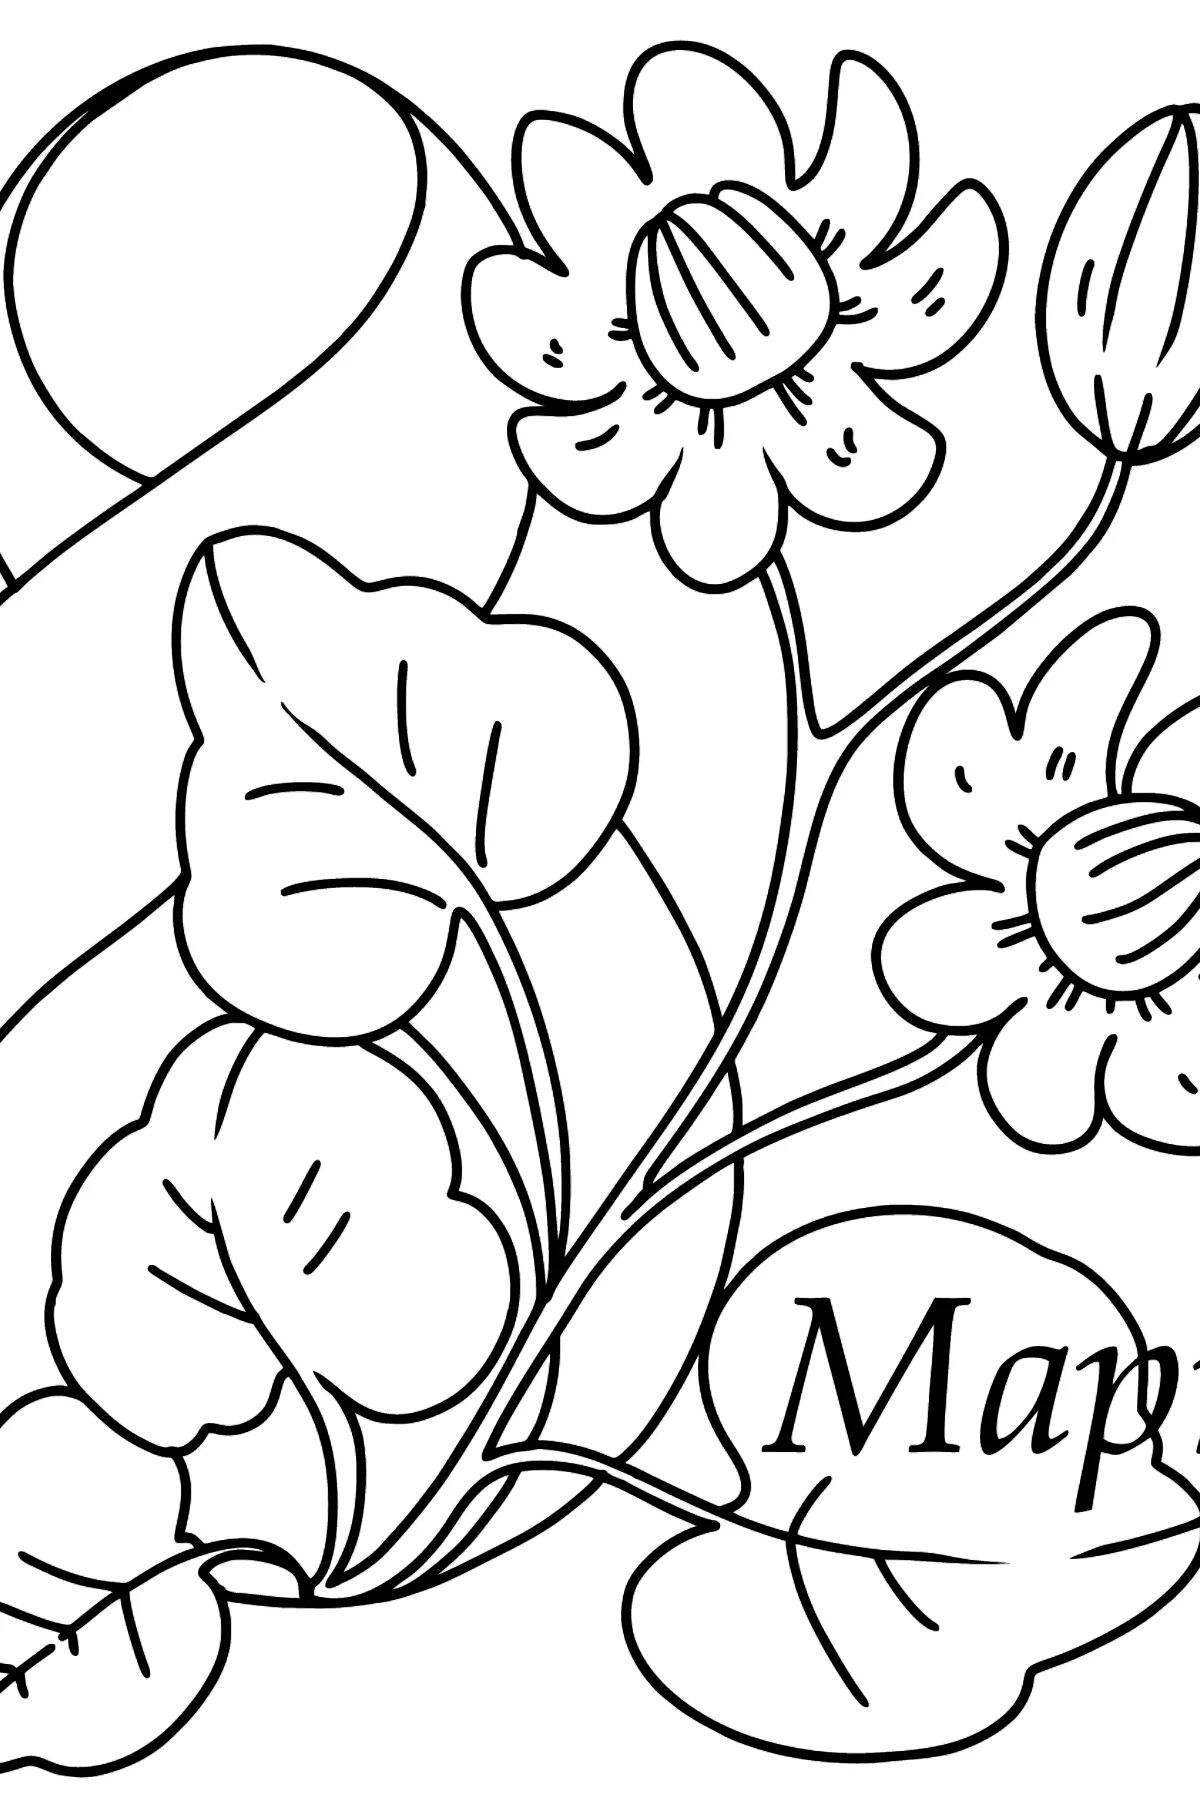 Adorable March 8 flowers coloring book